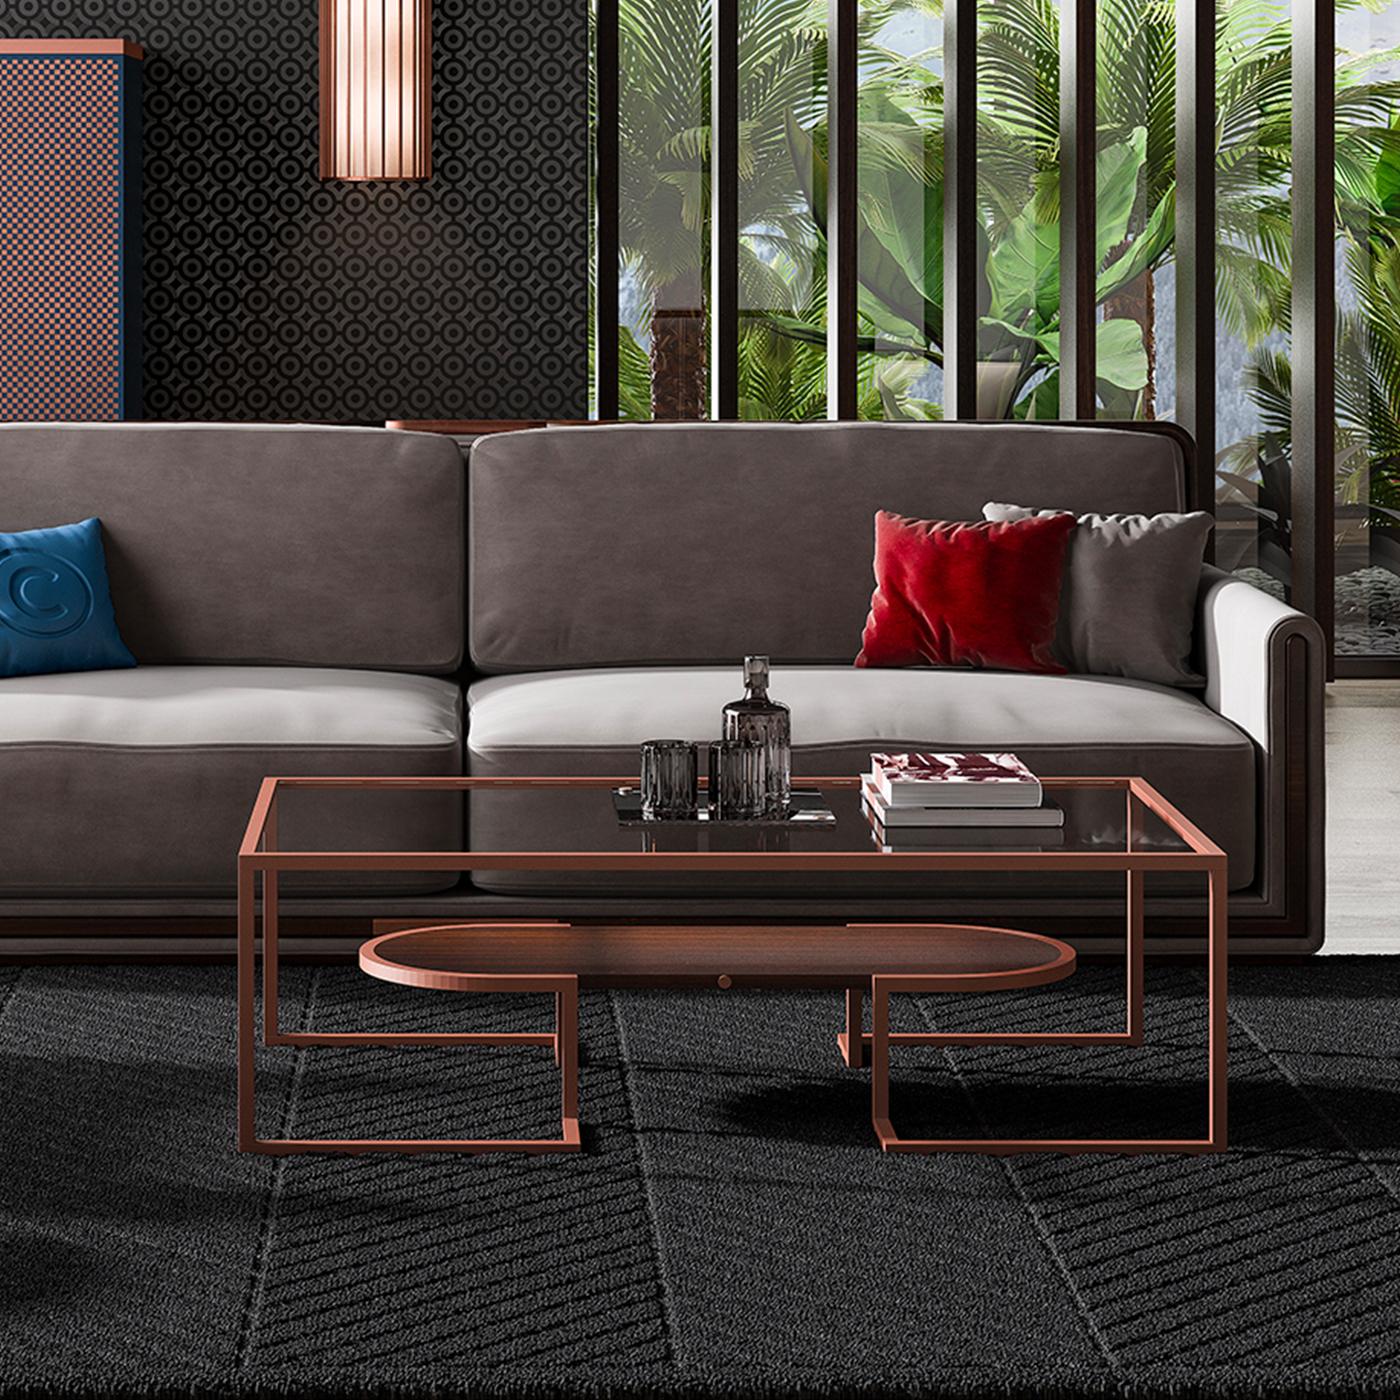 Characterized by sleek lines and flowing proportions, this Minimalist coffee will be an alluring focal point of a modern-styled dining room. Supported by an open metal structure with a brushed-copper finish, this impressive coffee table has a